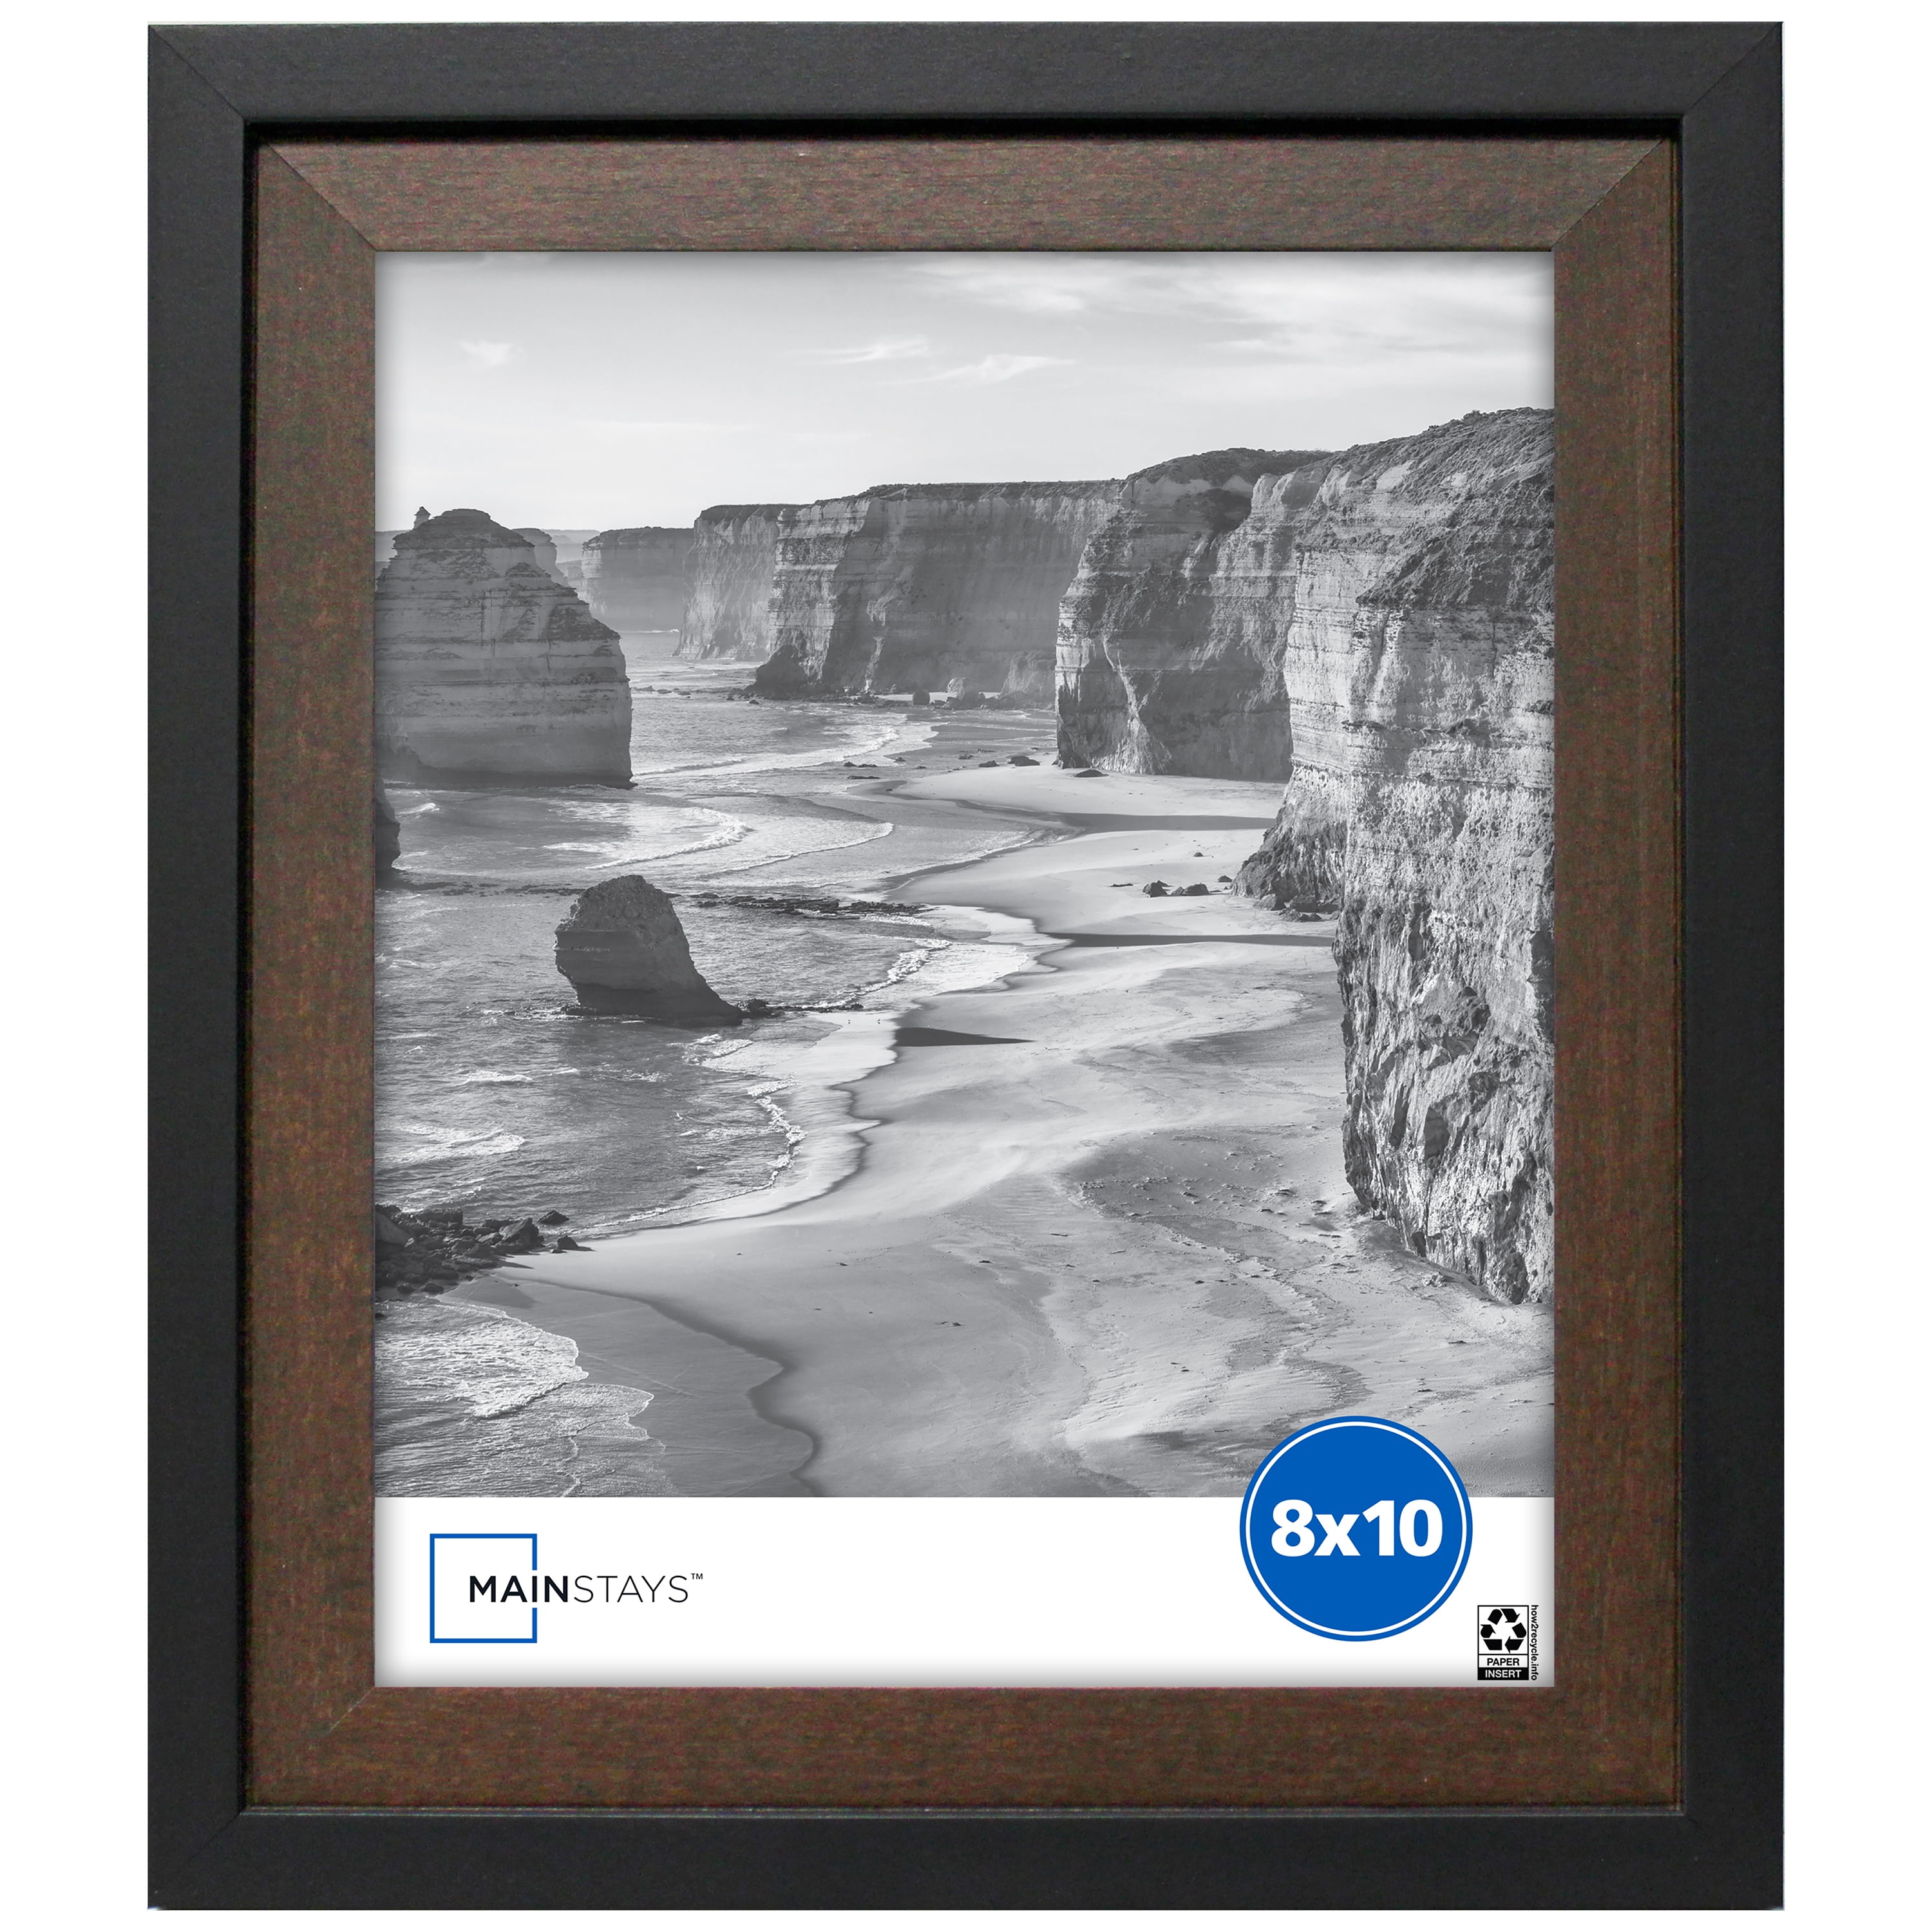 Harbortown Black Wood Picture Frame for 8"x10" Photo Décor Wall or Shelf or Desk 